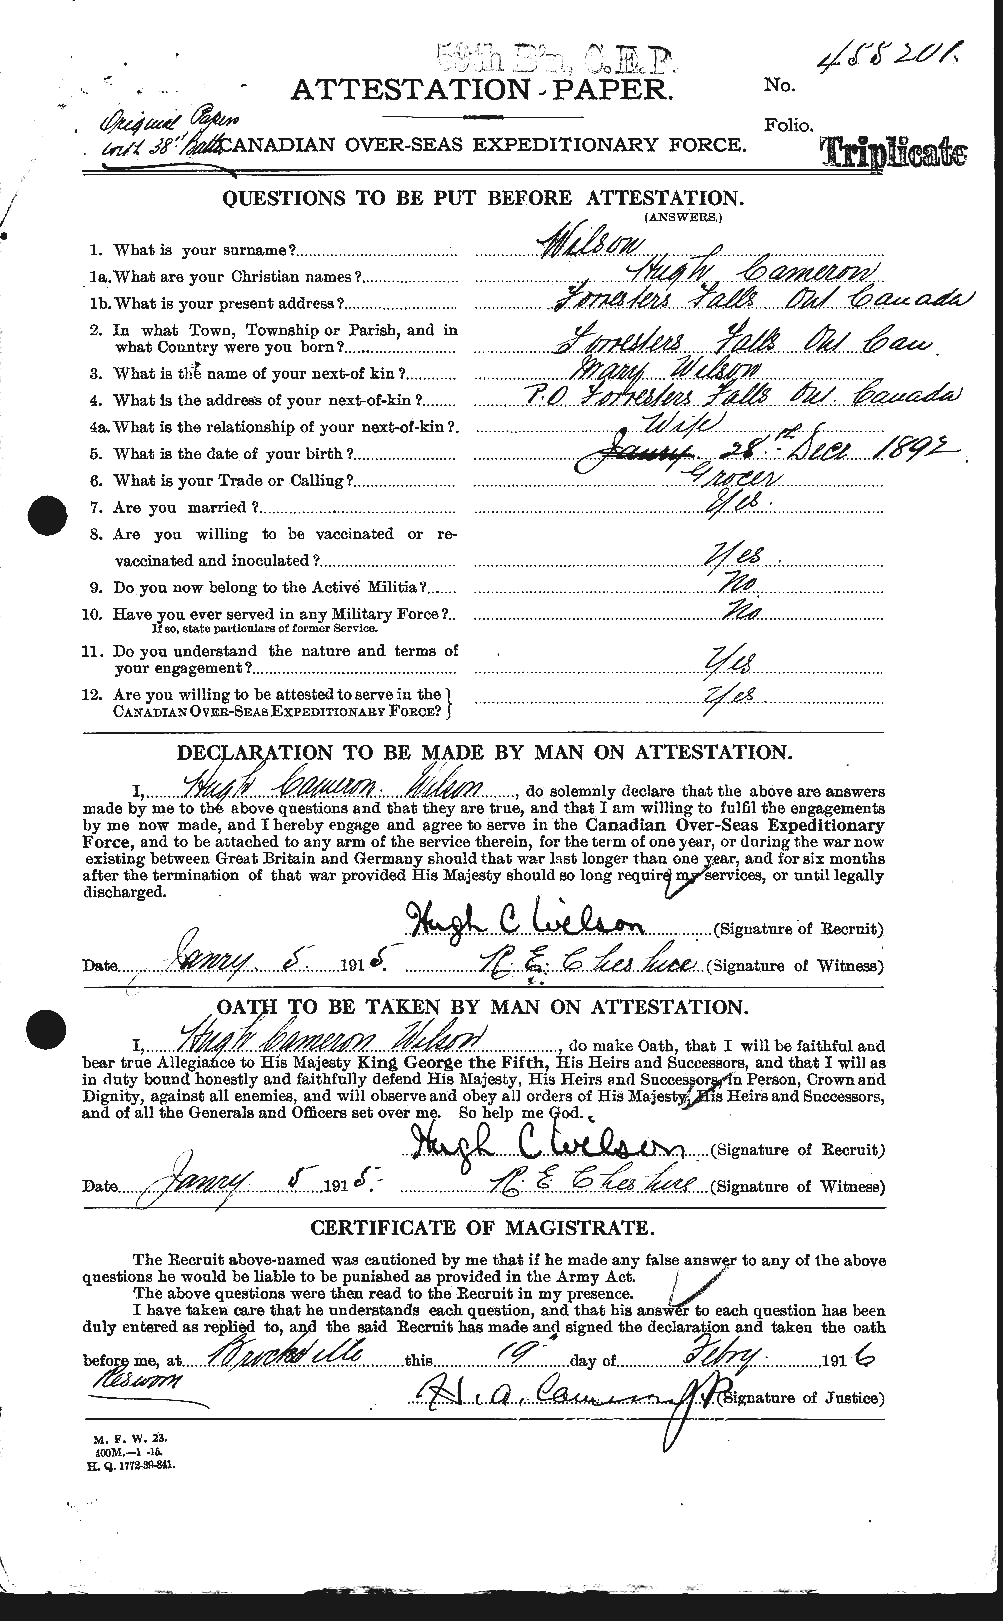 Personnel Records of the First World War - CEF 679611a